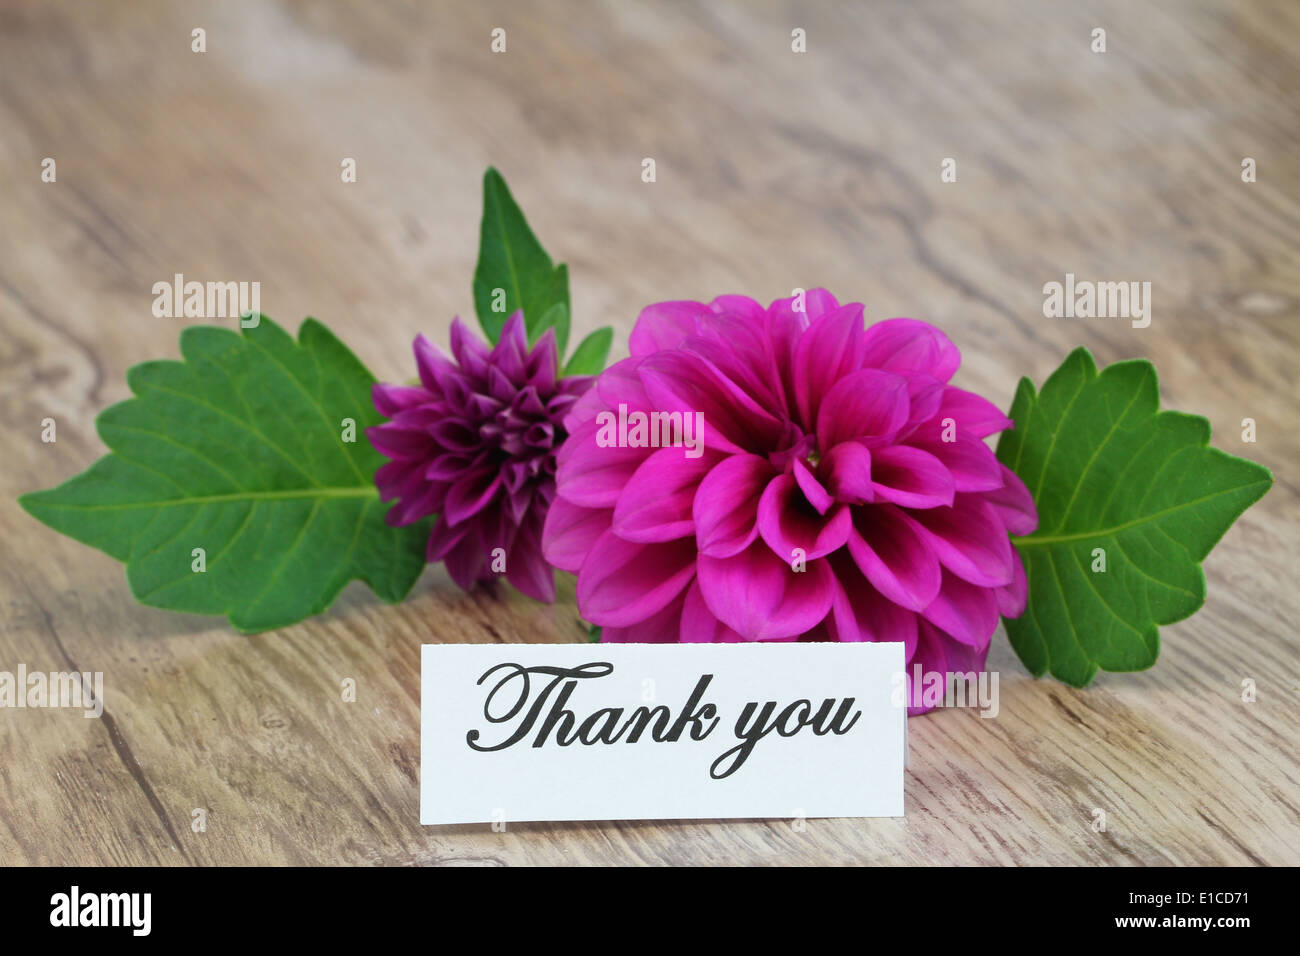 Thank you card with purple dahlia on wooden surface Stock Photo